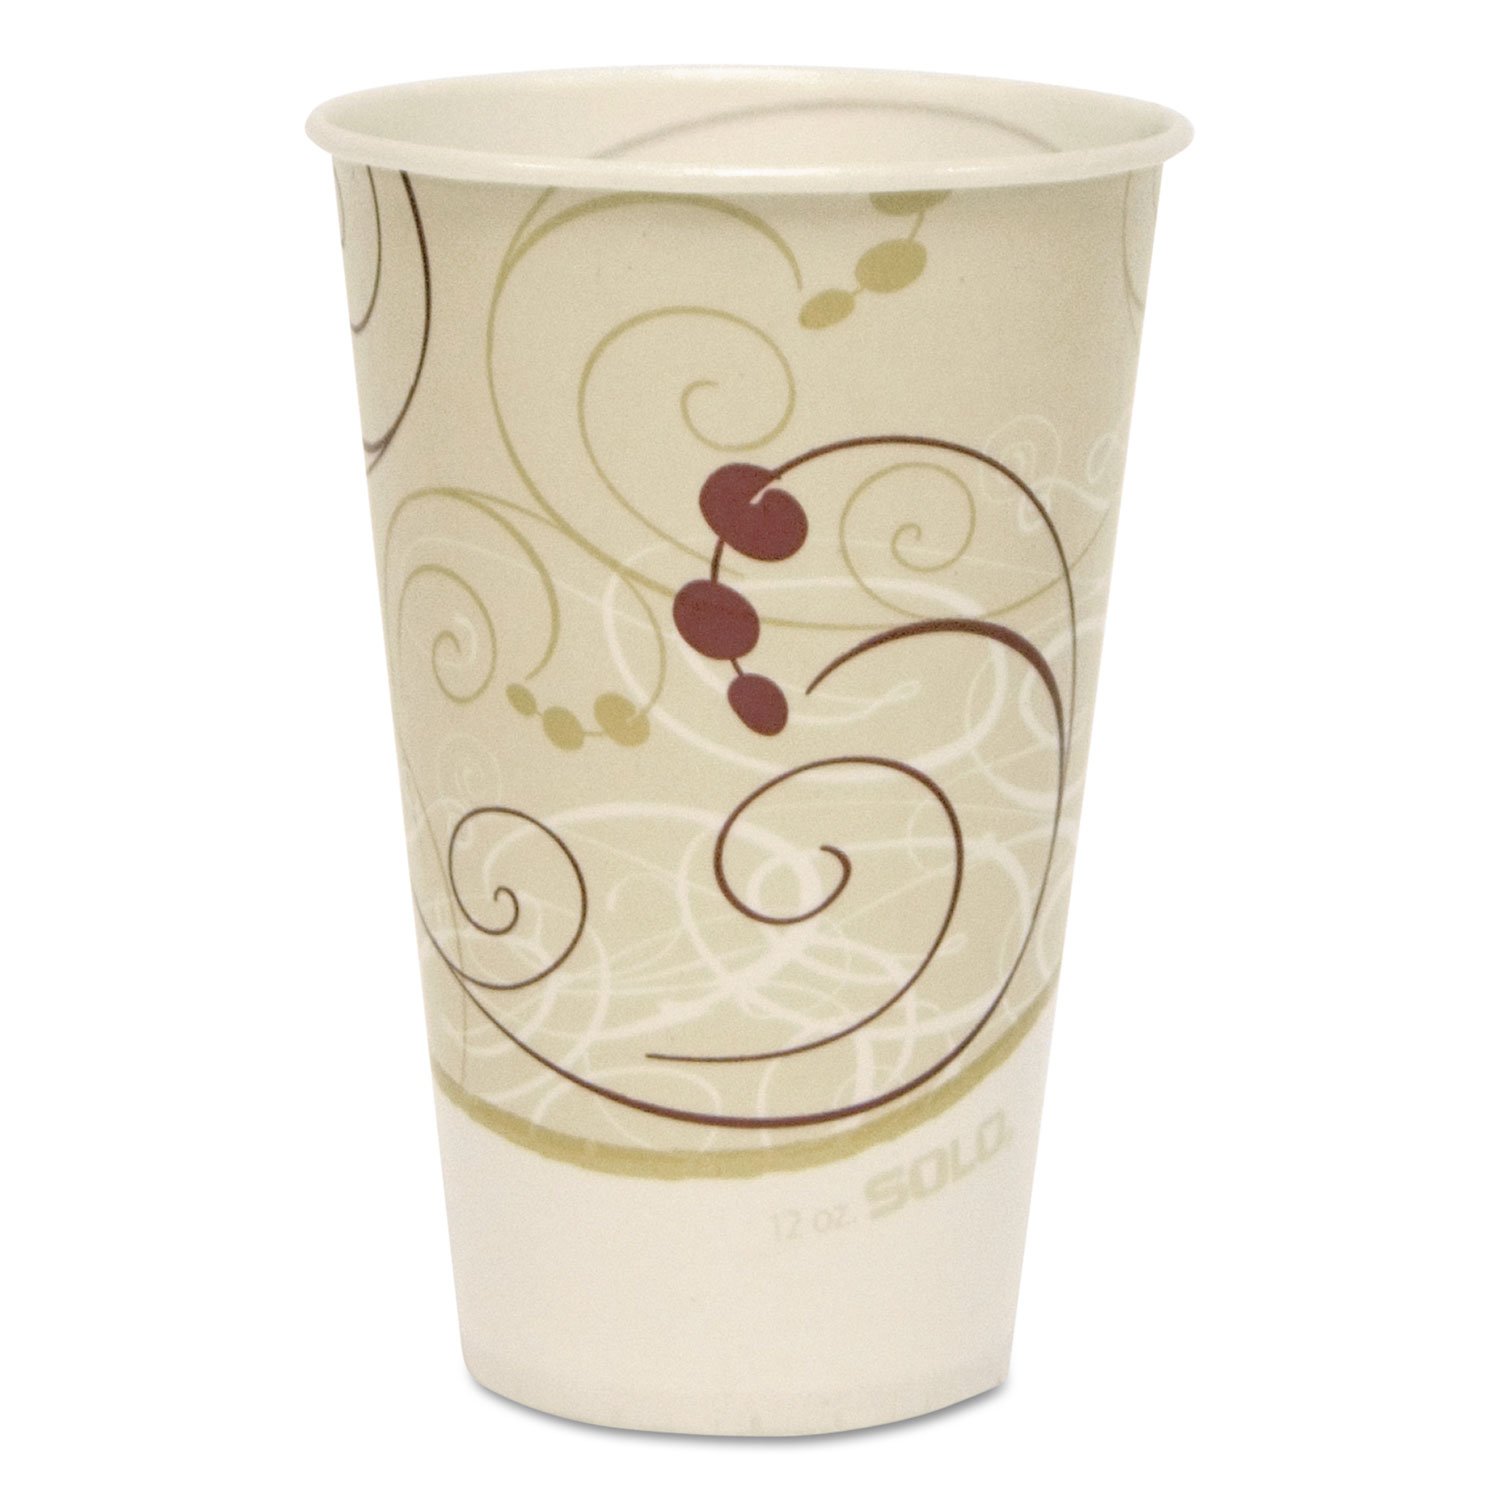 Solo Symphony Treated-Paper Cold Cups, 12 oz, White/Beige/Red, 100/Bag, 20 Bags/Carton